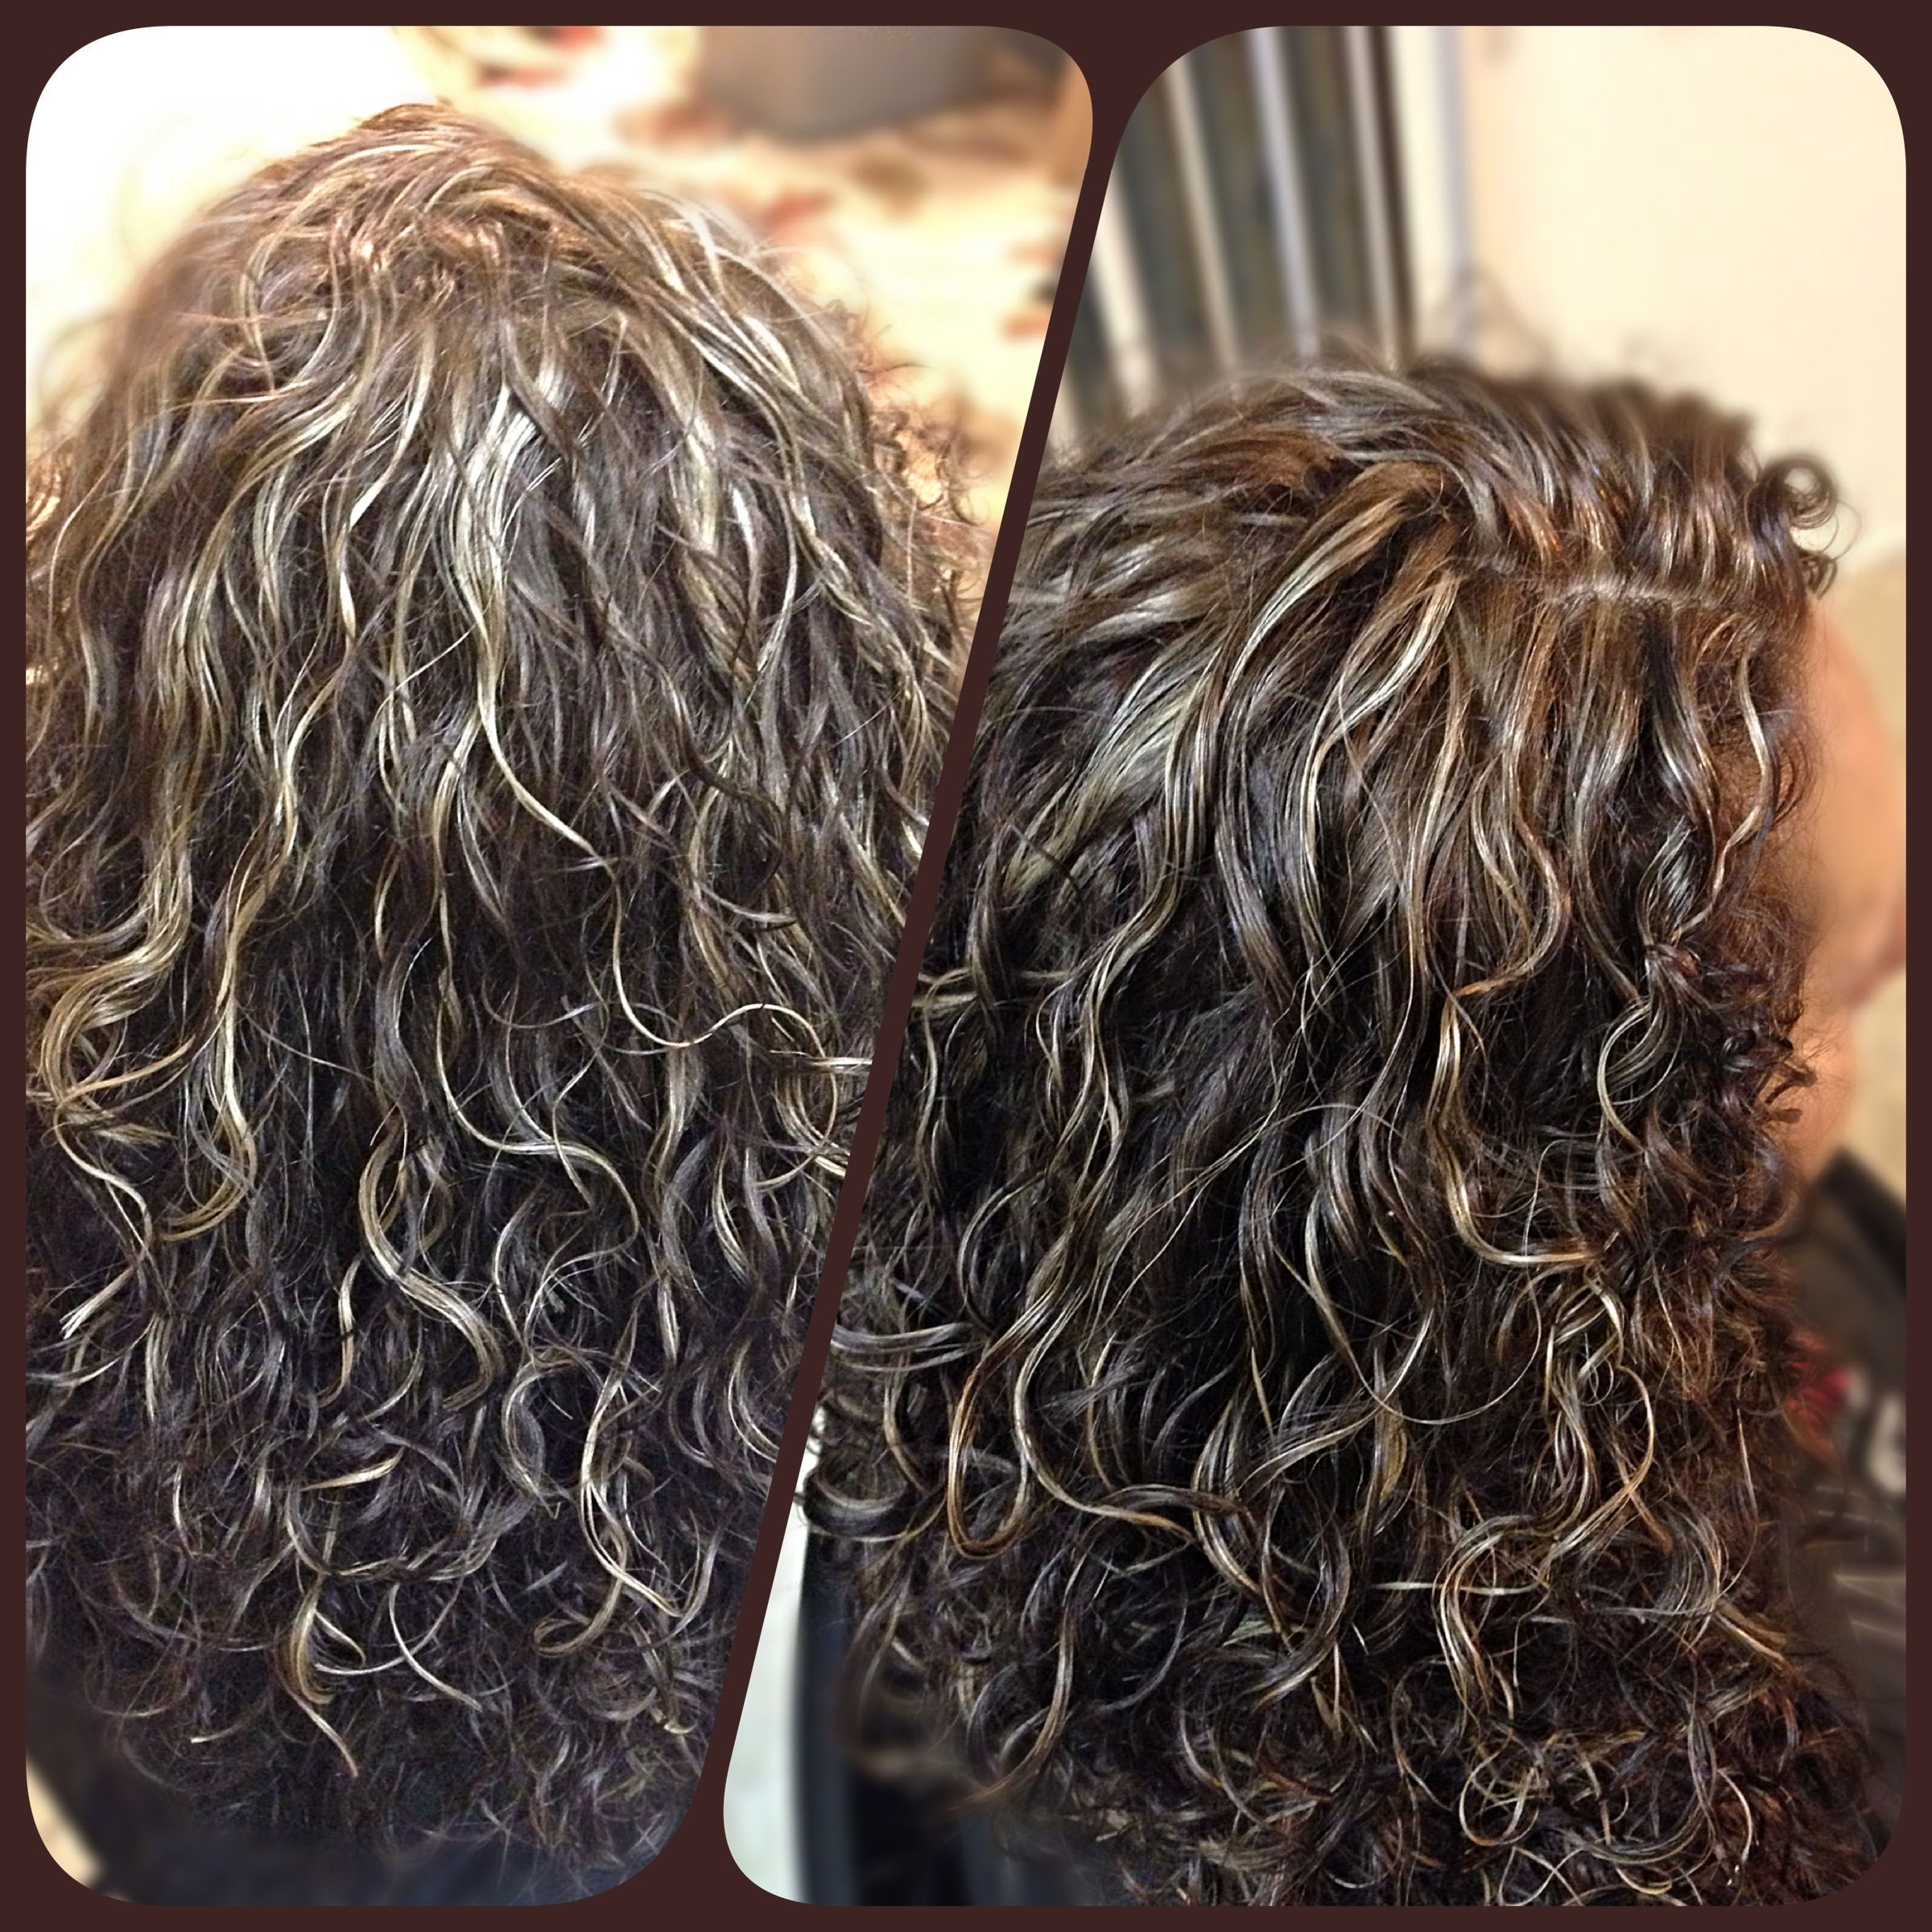 Subtle Blonde+caramel Highlights Med Brown Hair Color Naturally With Black Wet Curly Bob Hairstyles With Subtle Highlights (View 15 of 20)